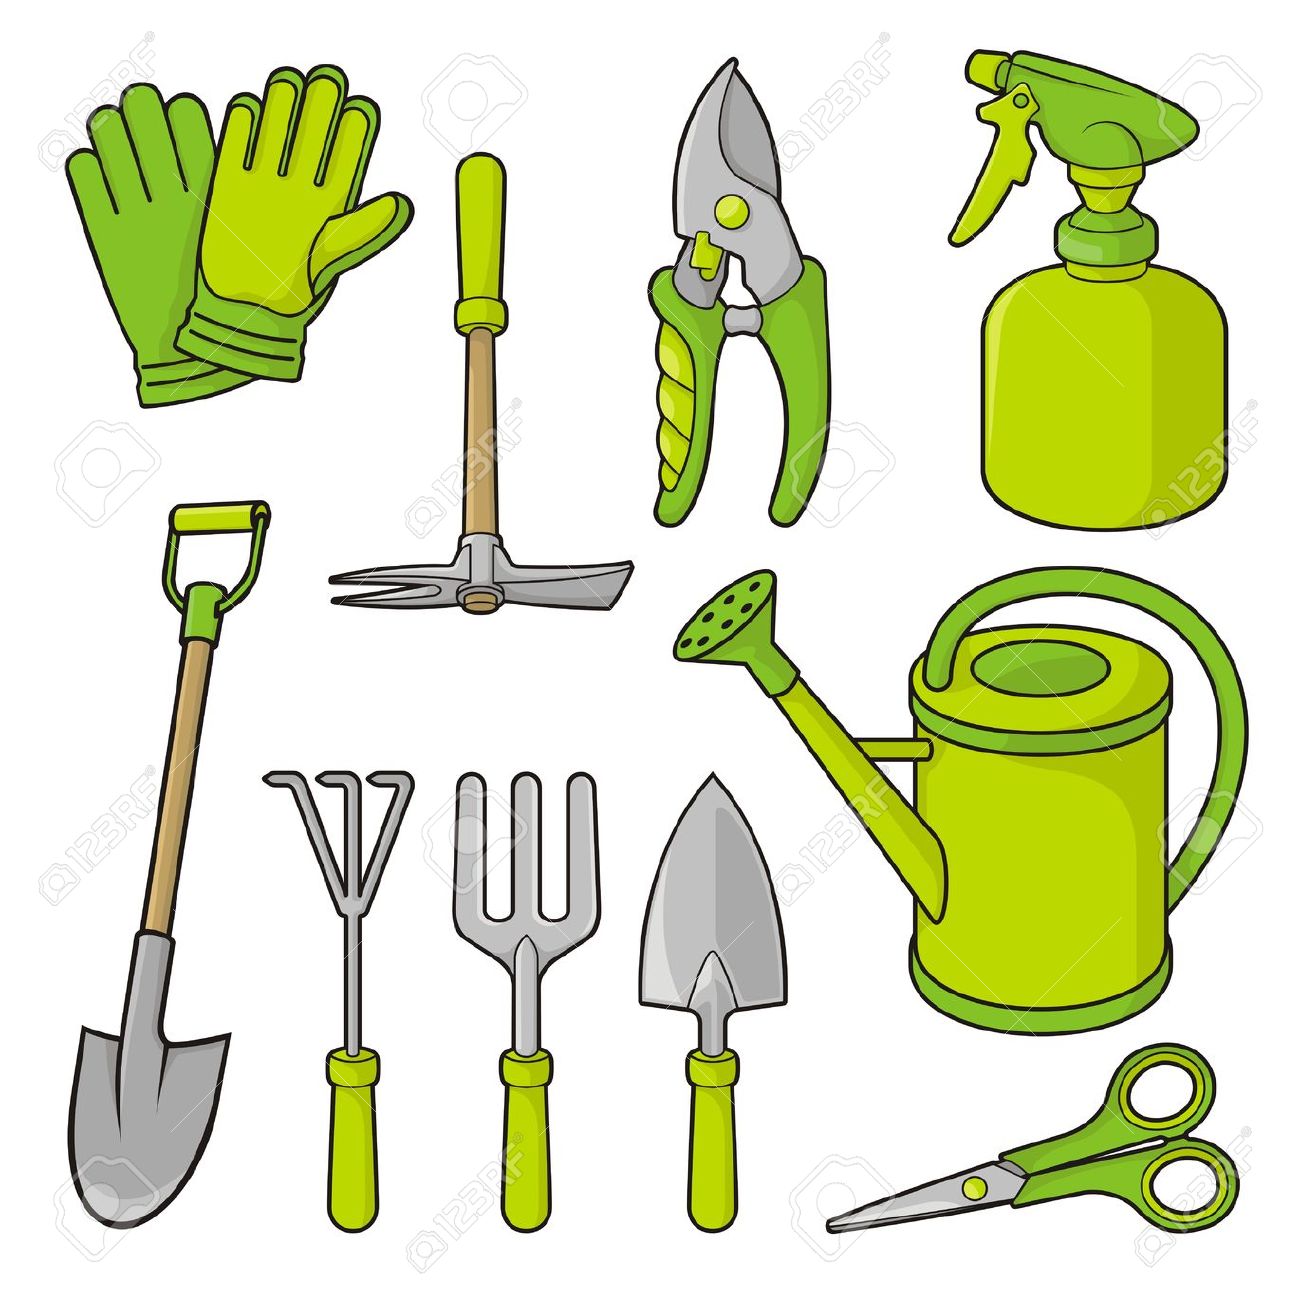 Free Flower Tools Cliparts, Download Free Clip Art, Free